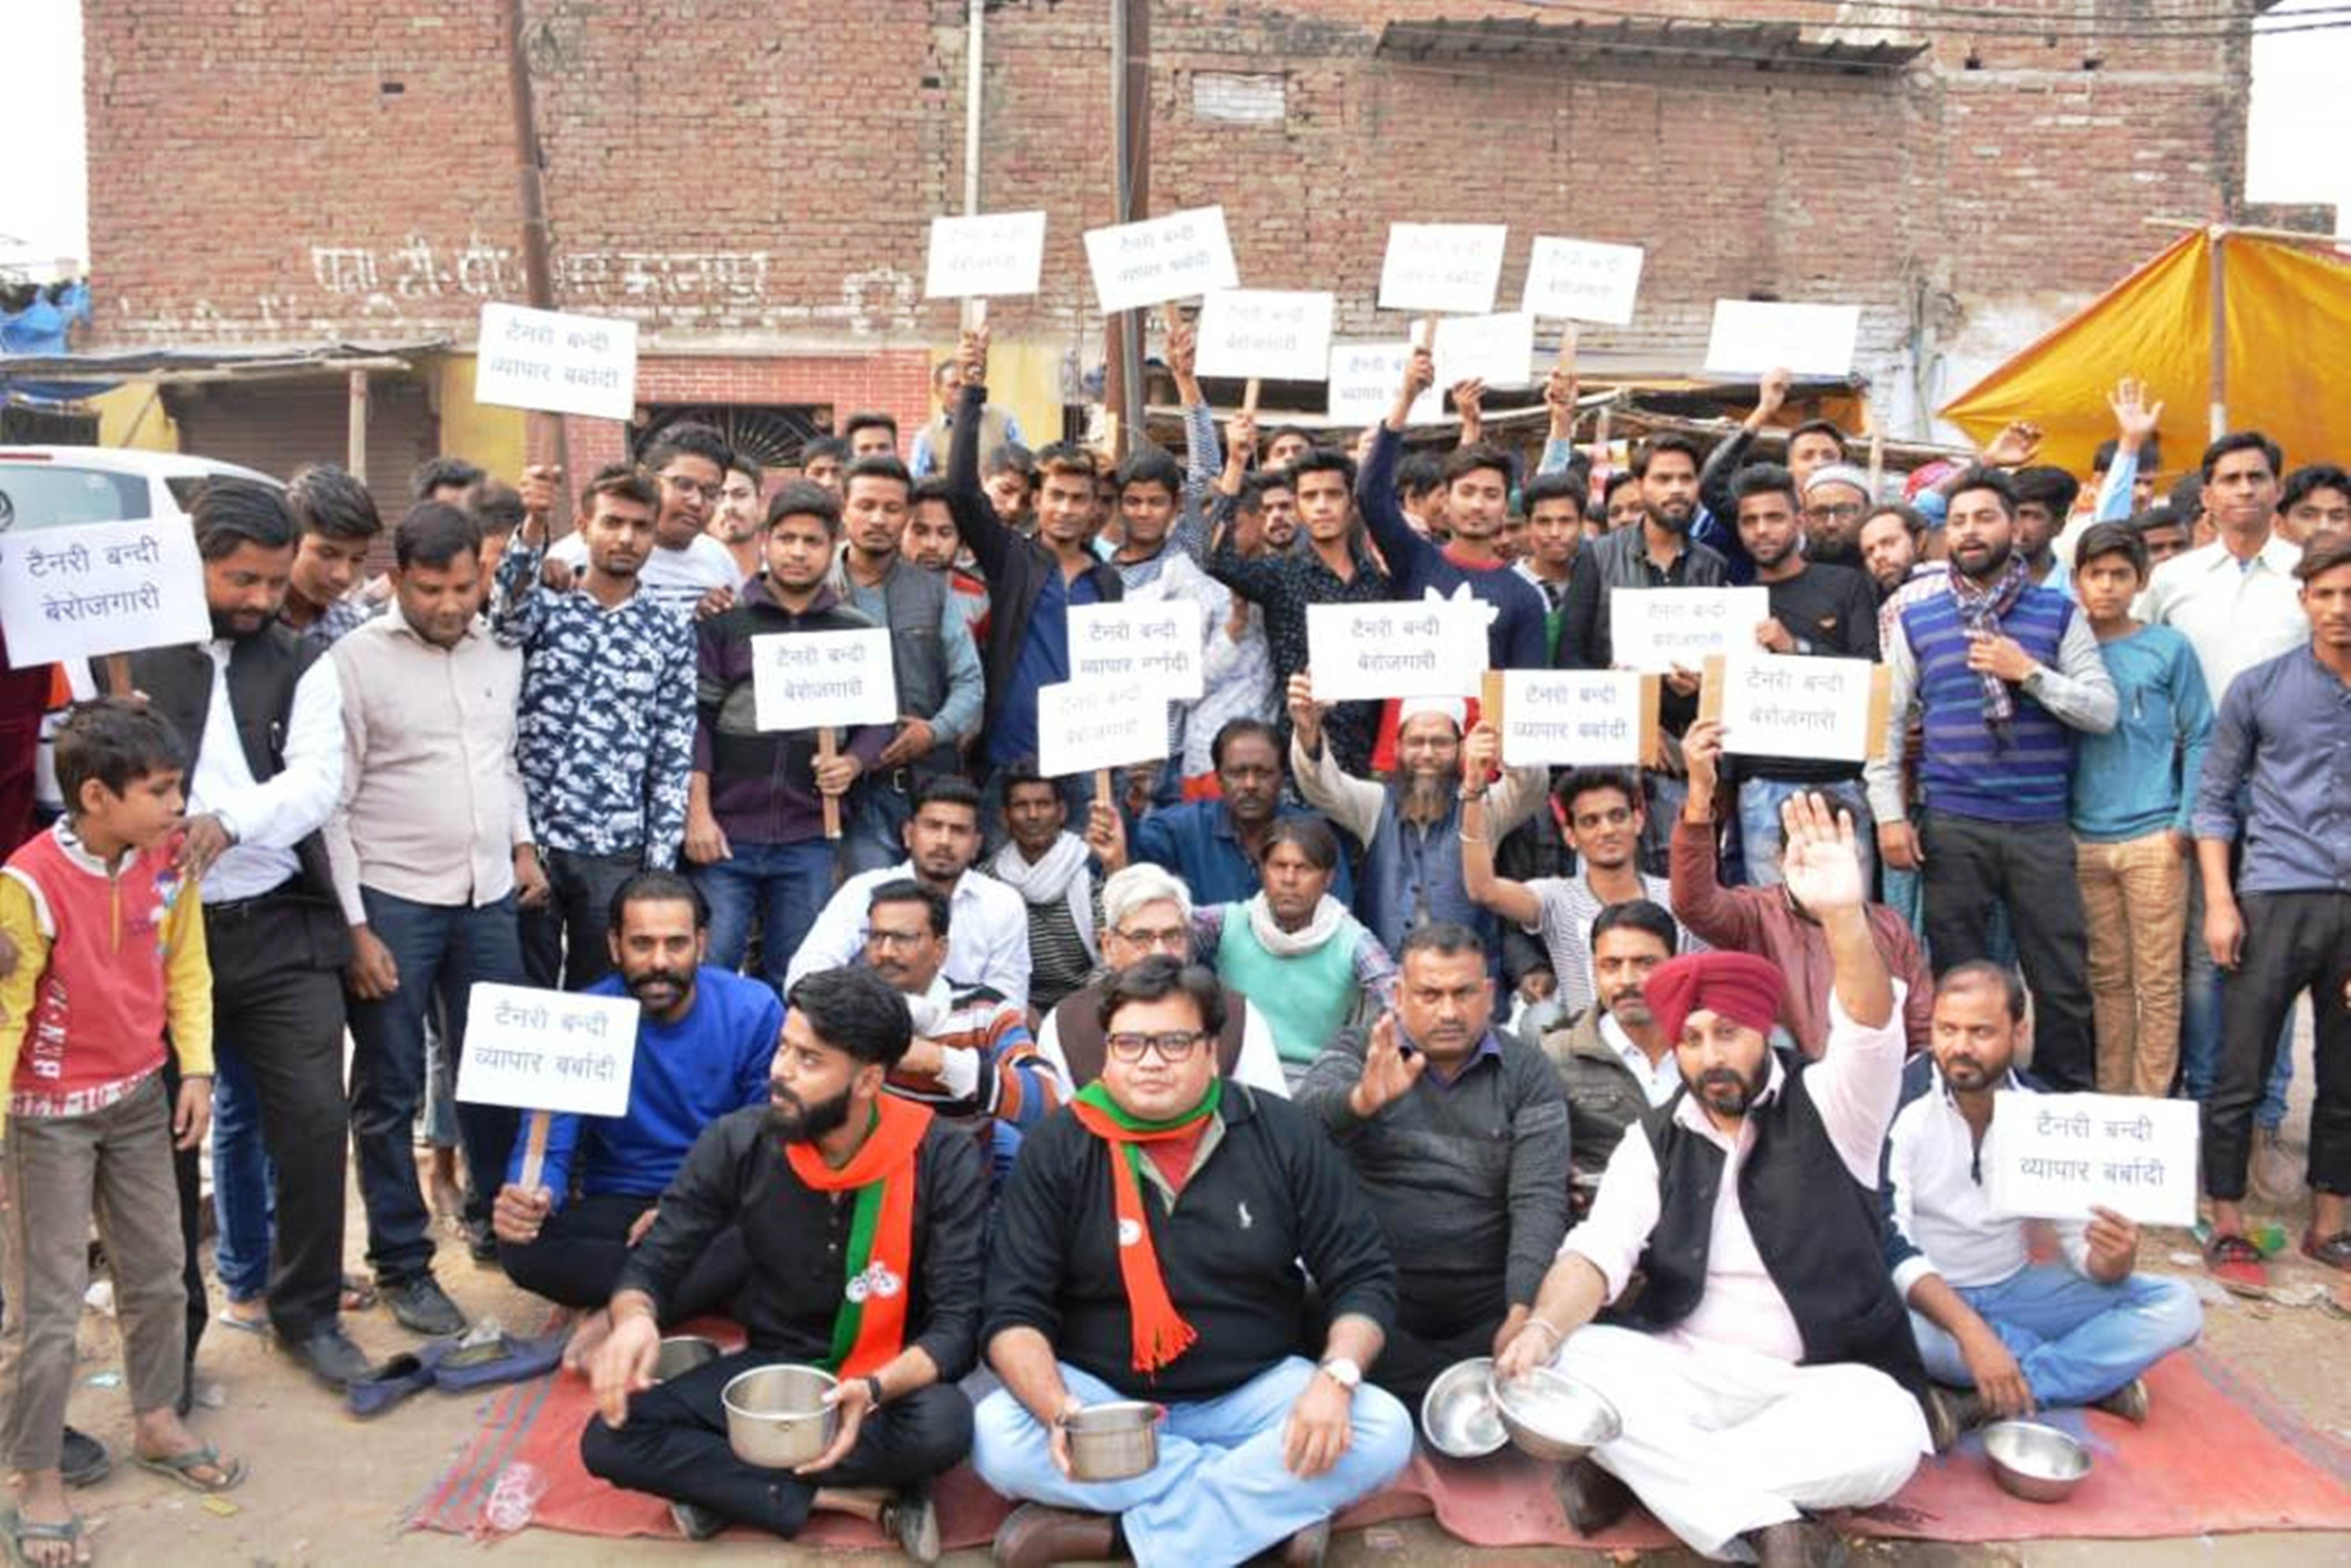 leather industrialists movement in jajmau against closing of tenry